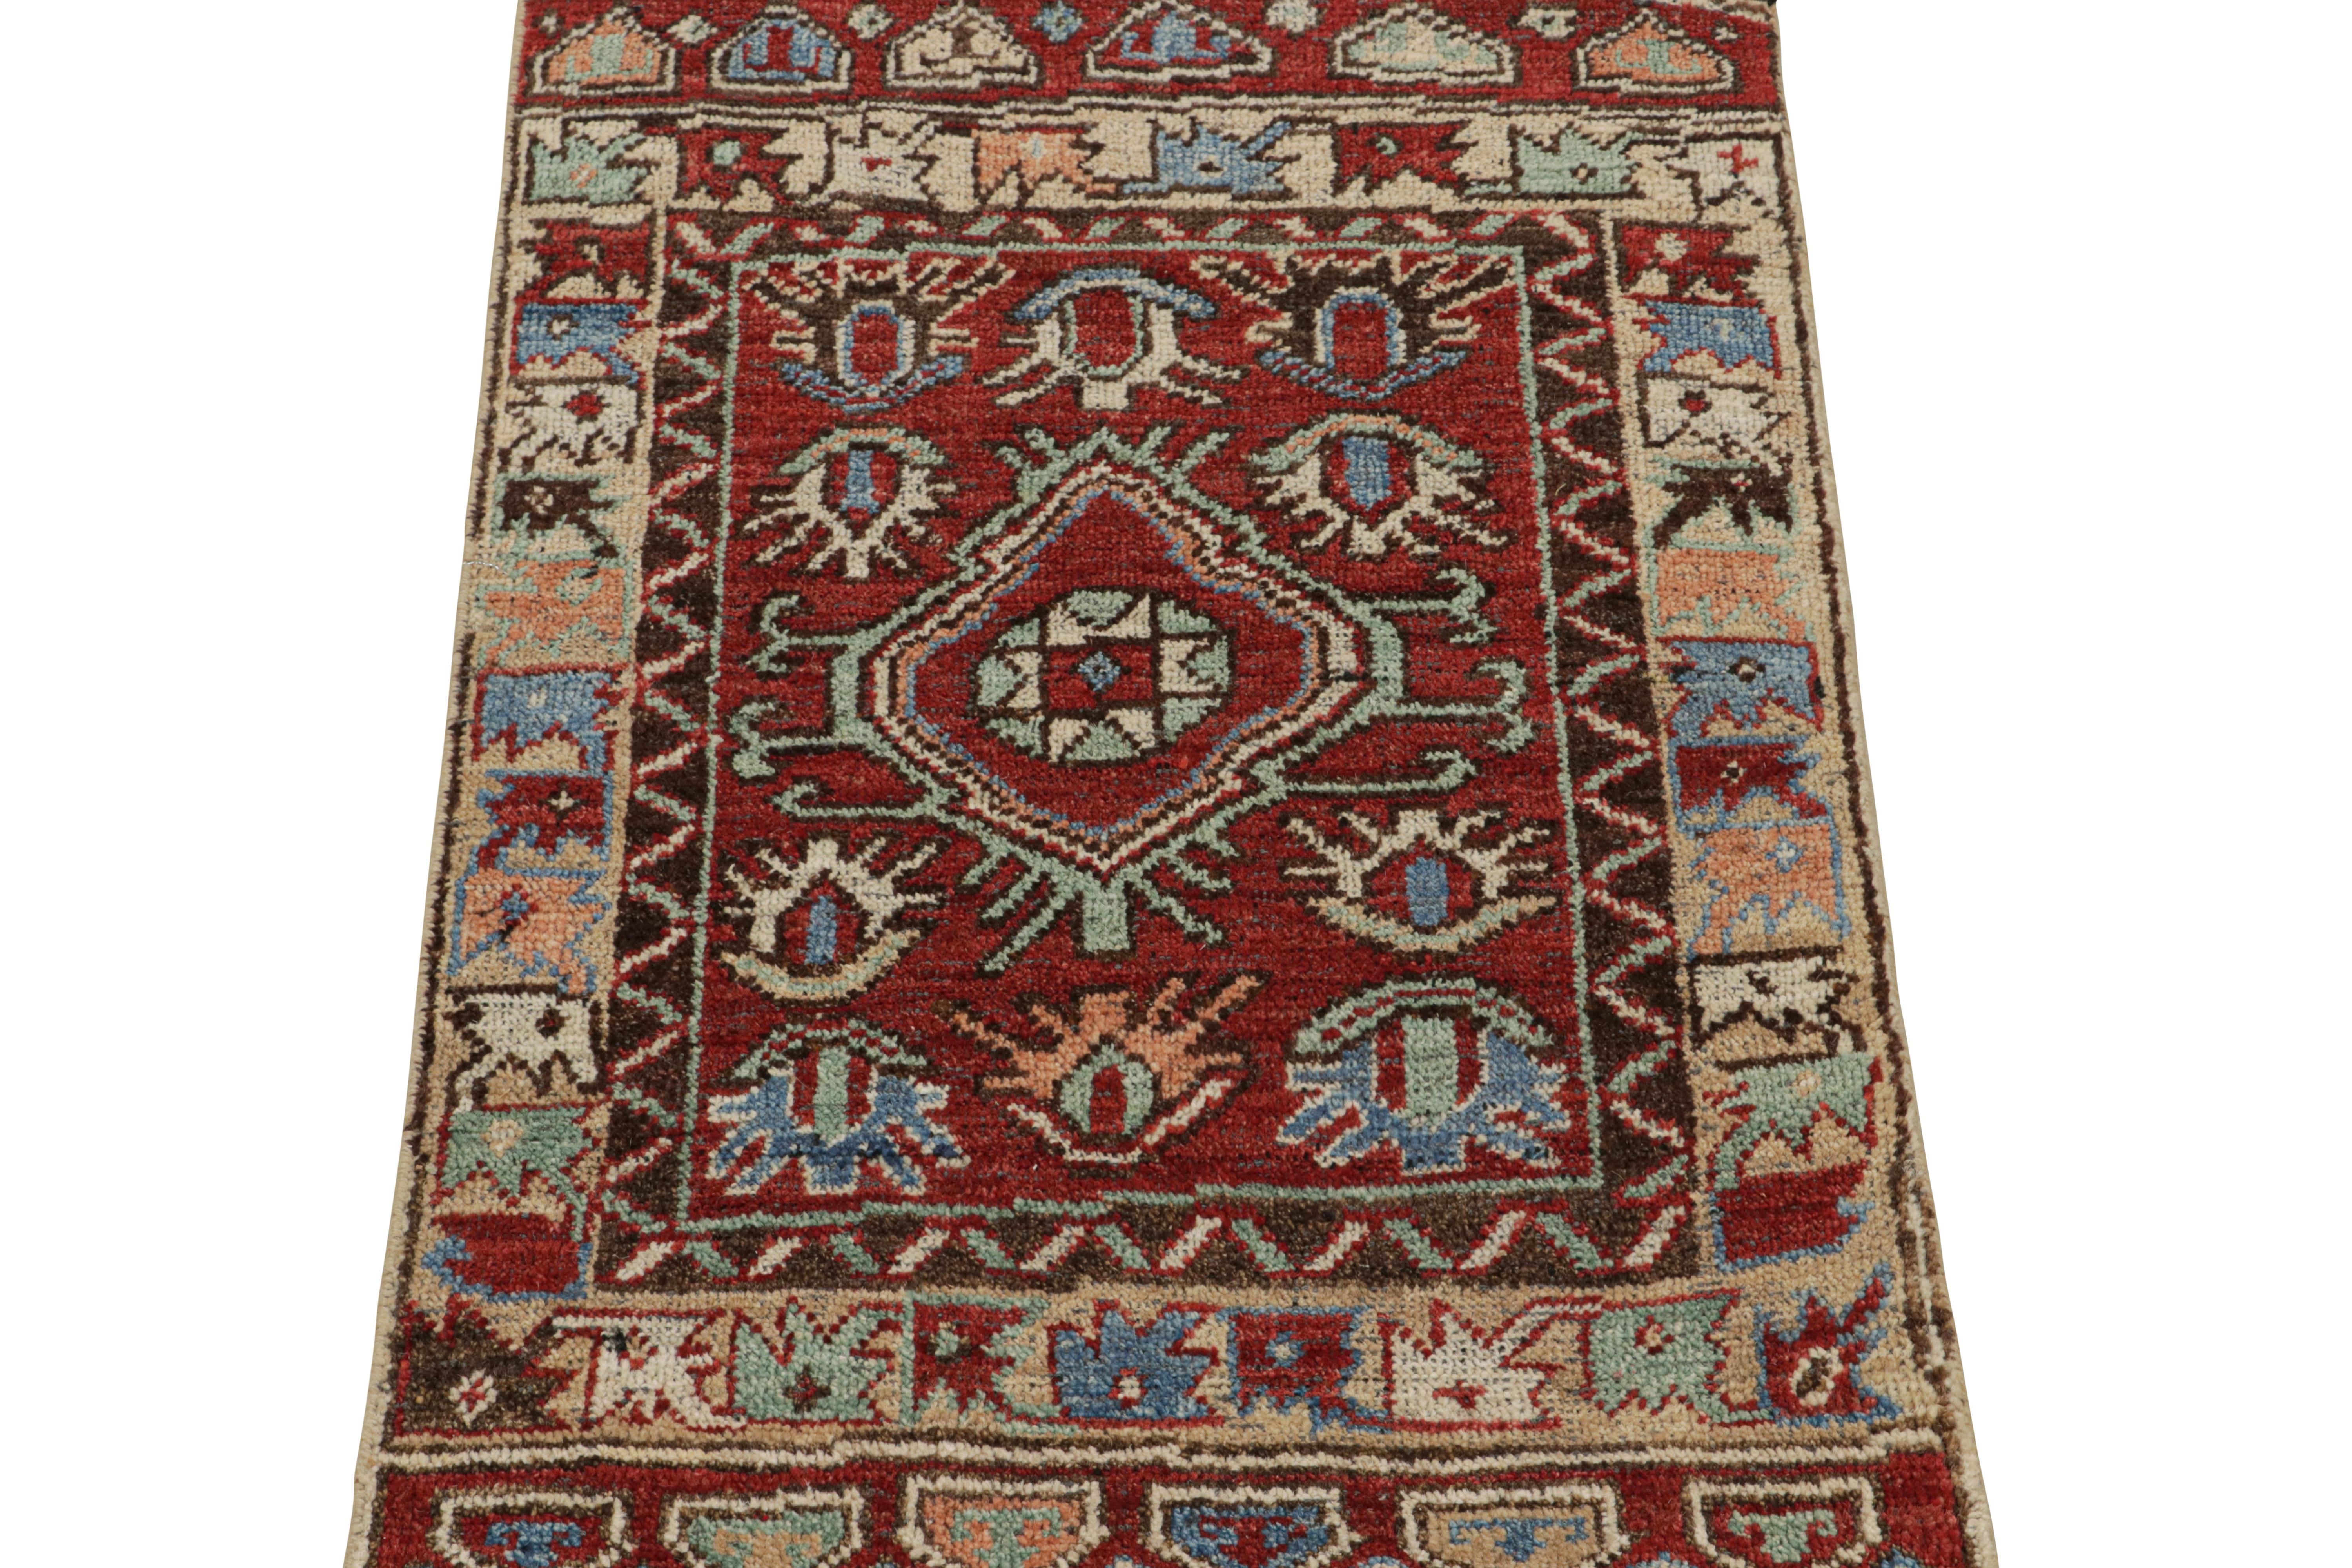 This gift-sized 2x3 rug is a new addition to the custom classics Burano Collection by Rug & Kilim. Hand-knotted in wool, this line explores the most iconic antique rug styles in history with a smart contemporary approach.

On the Design: 

This rug